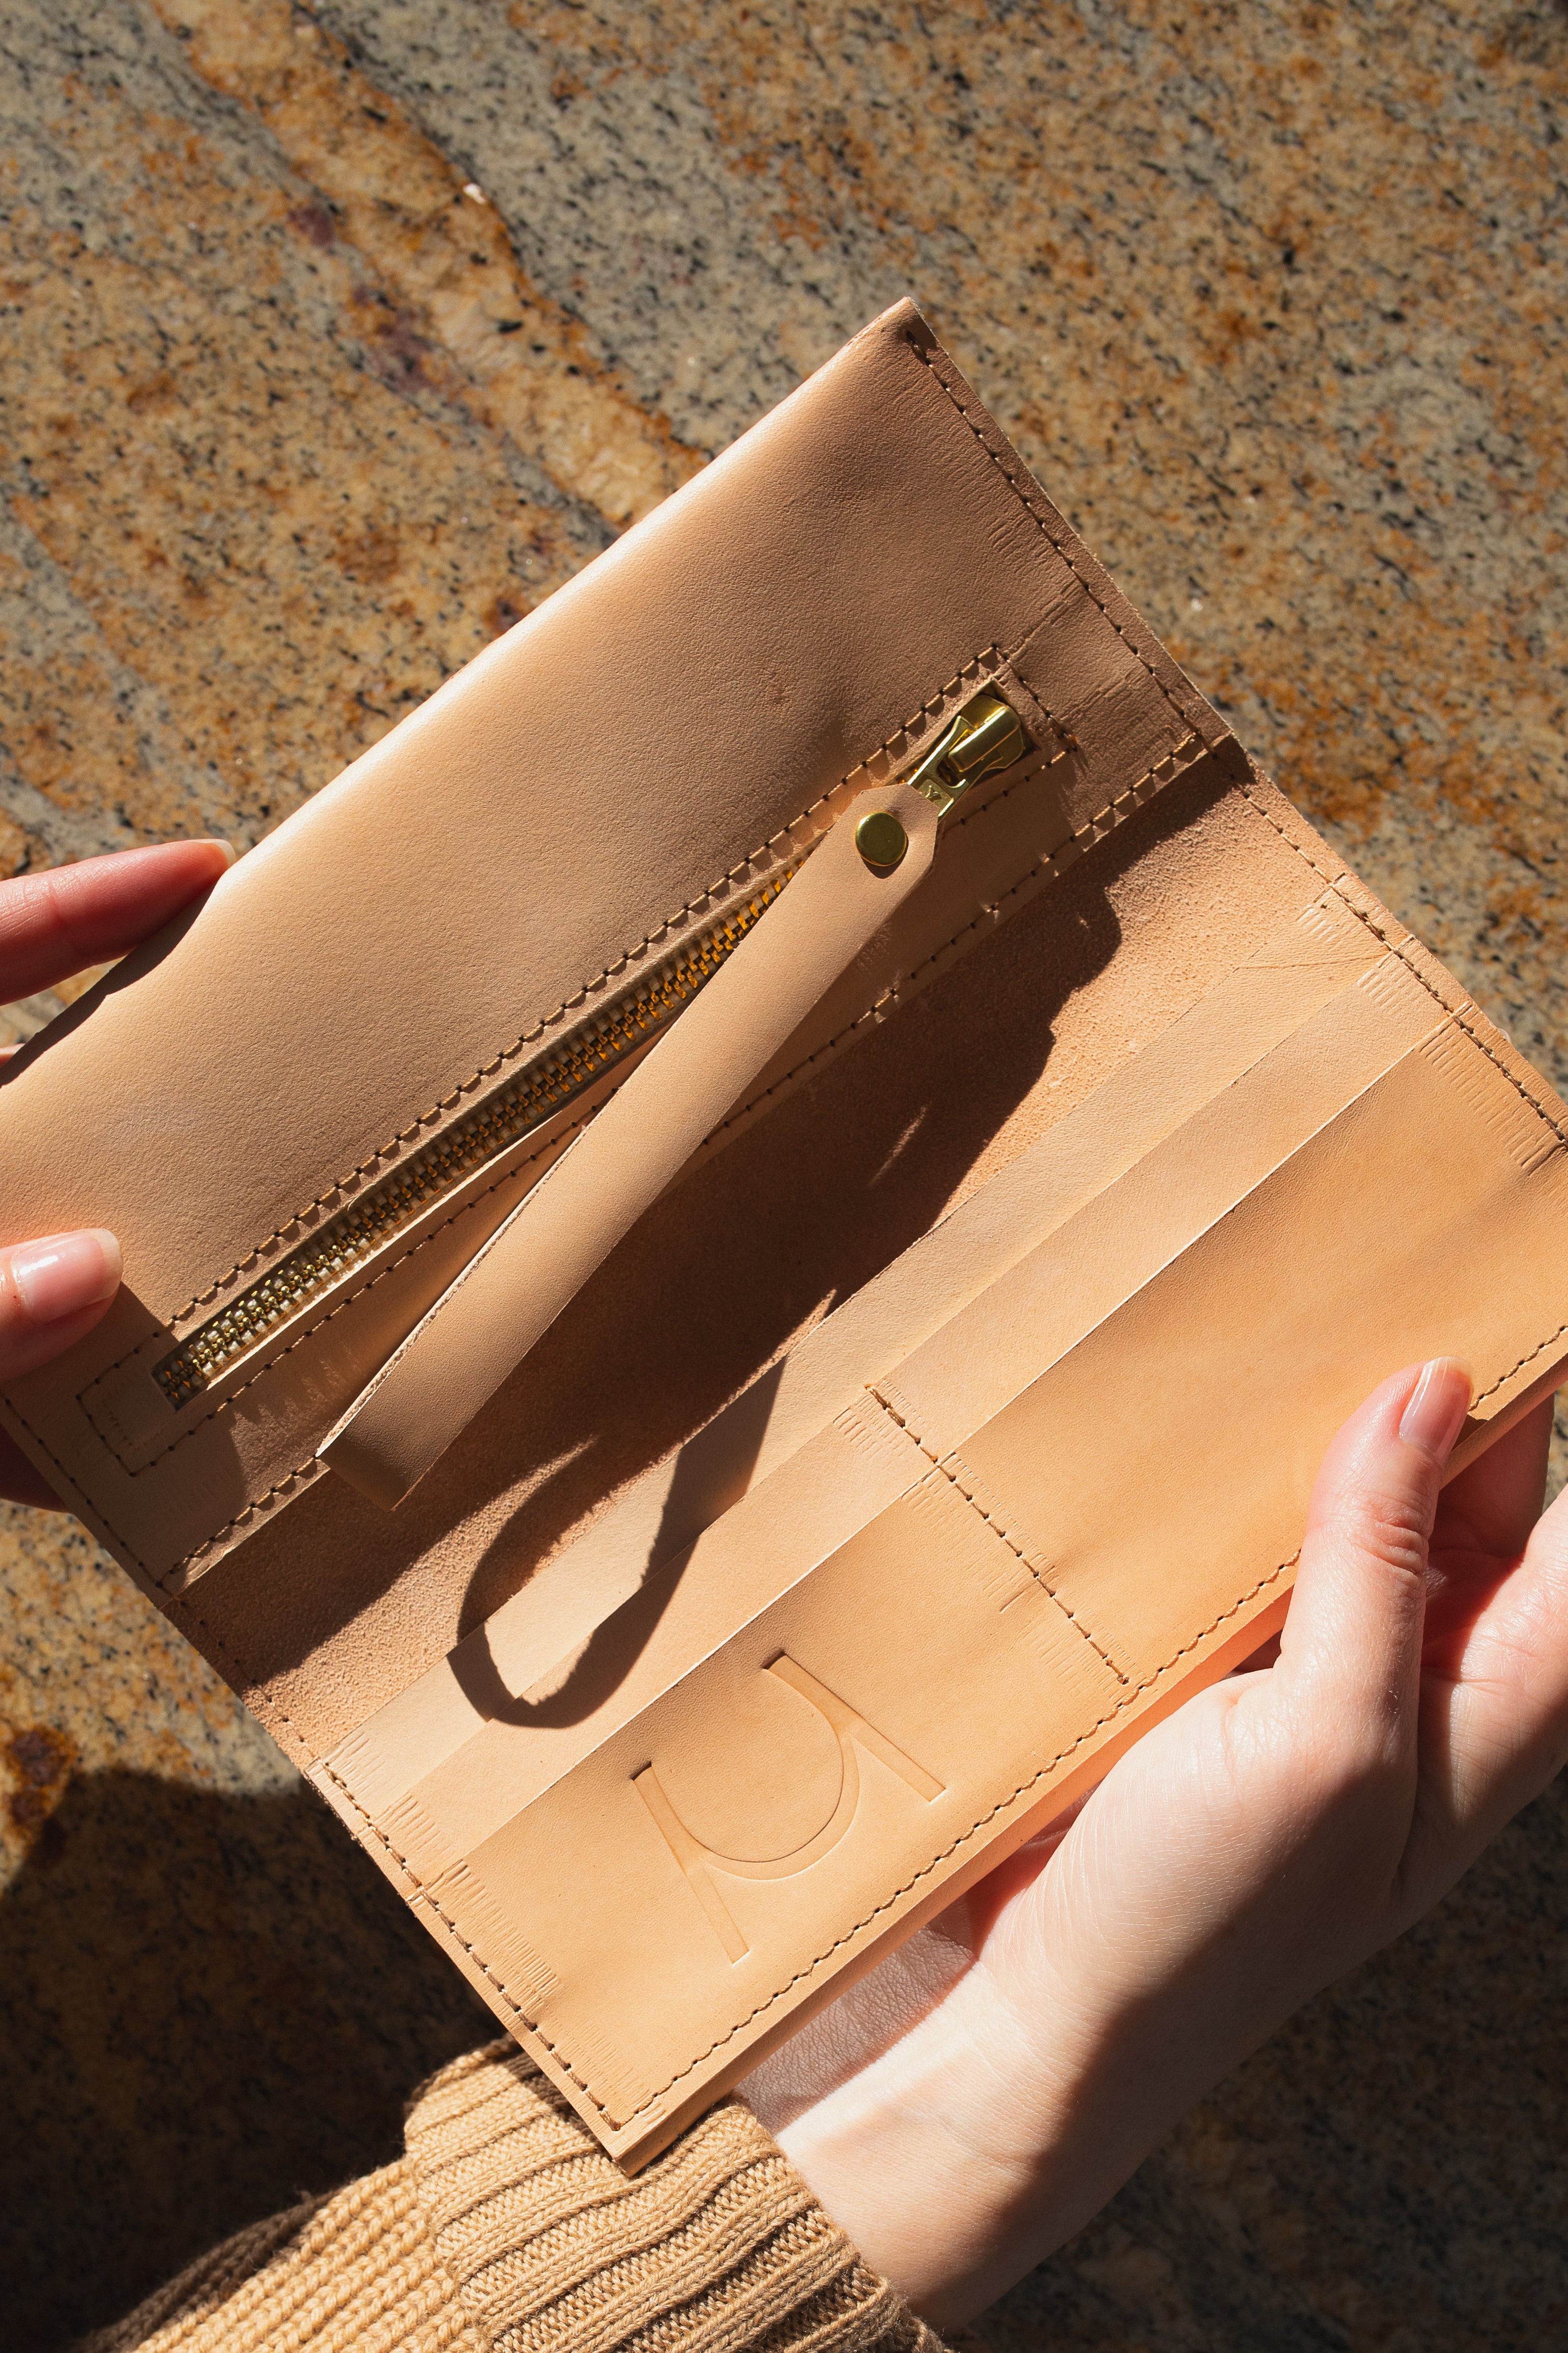 ANGES LEATHER WALLET | NATURAL Leather Bag - handcrafted by Market Canvas Leather in Tofino, BC, Canada